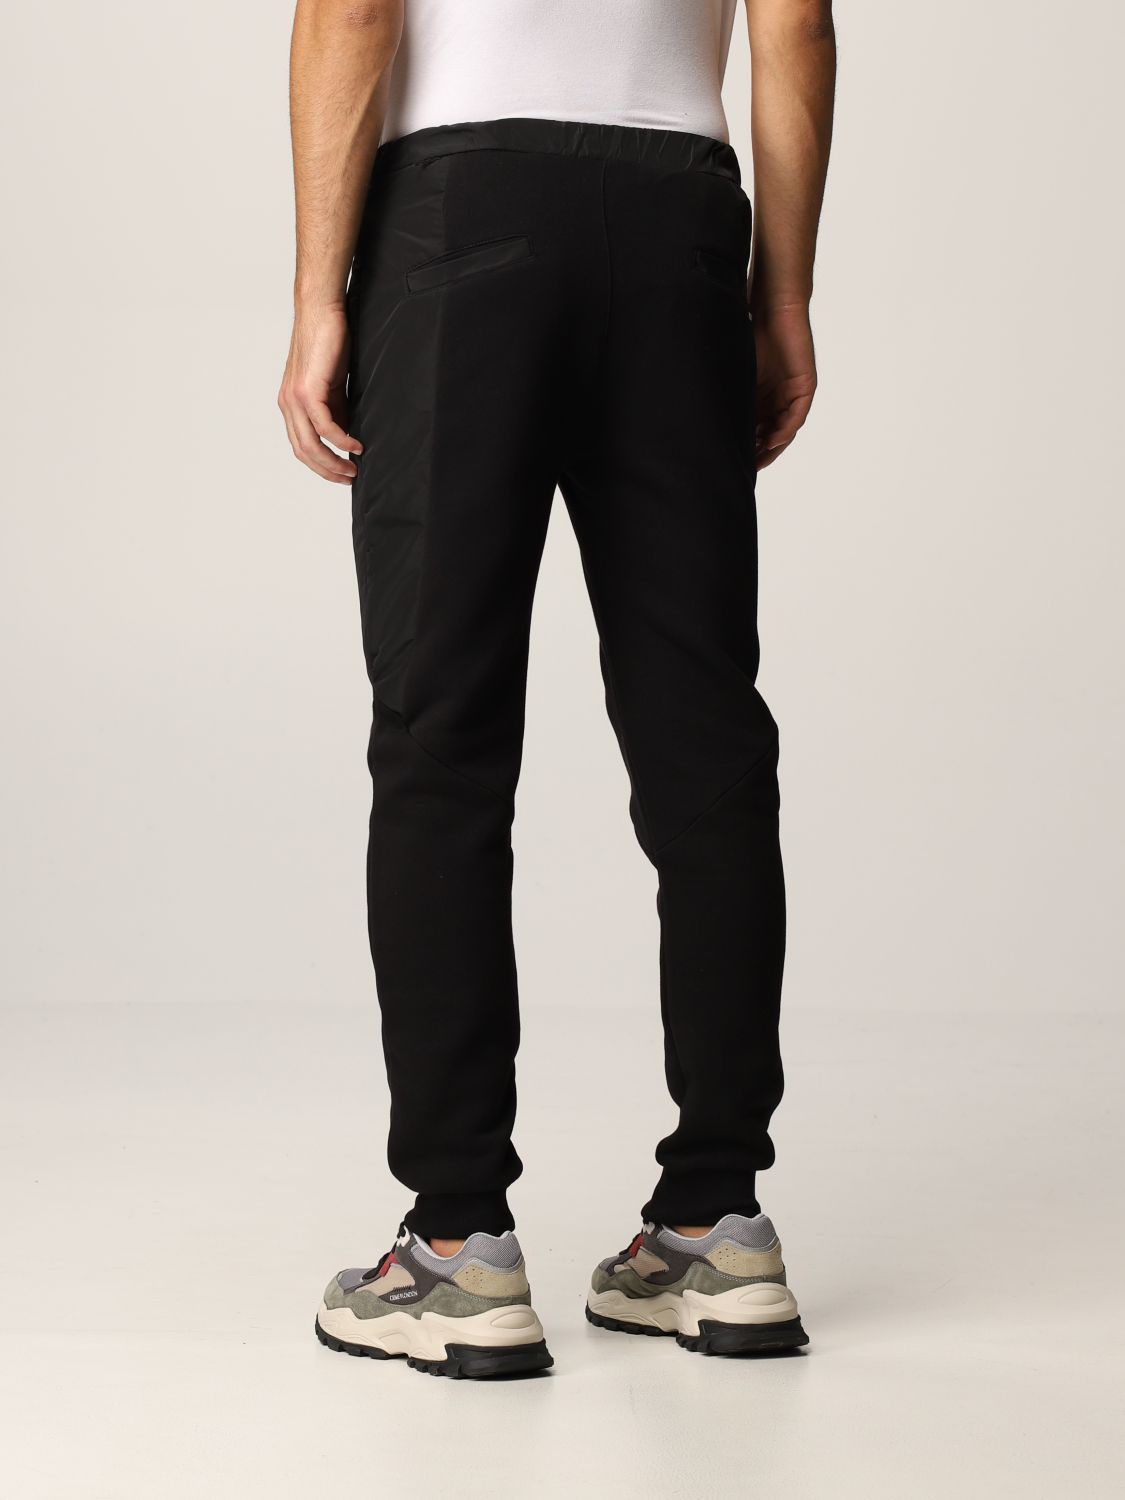 Trousers Pmds: Trousers men Pmds black 2